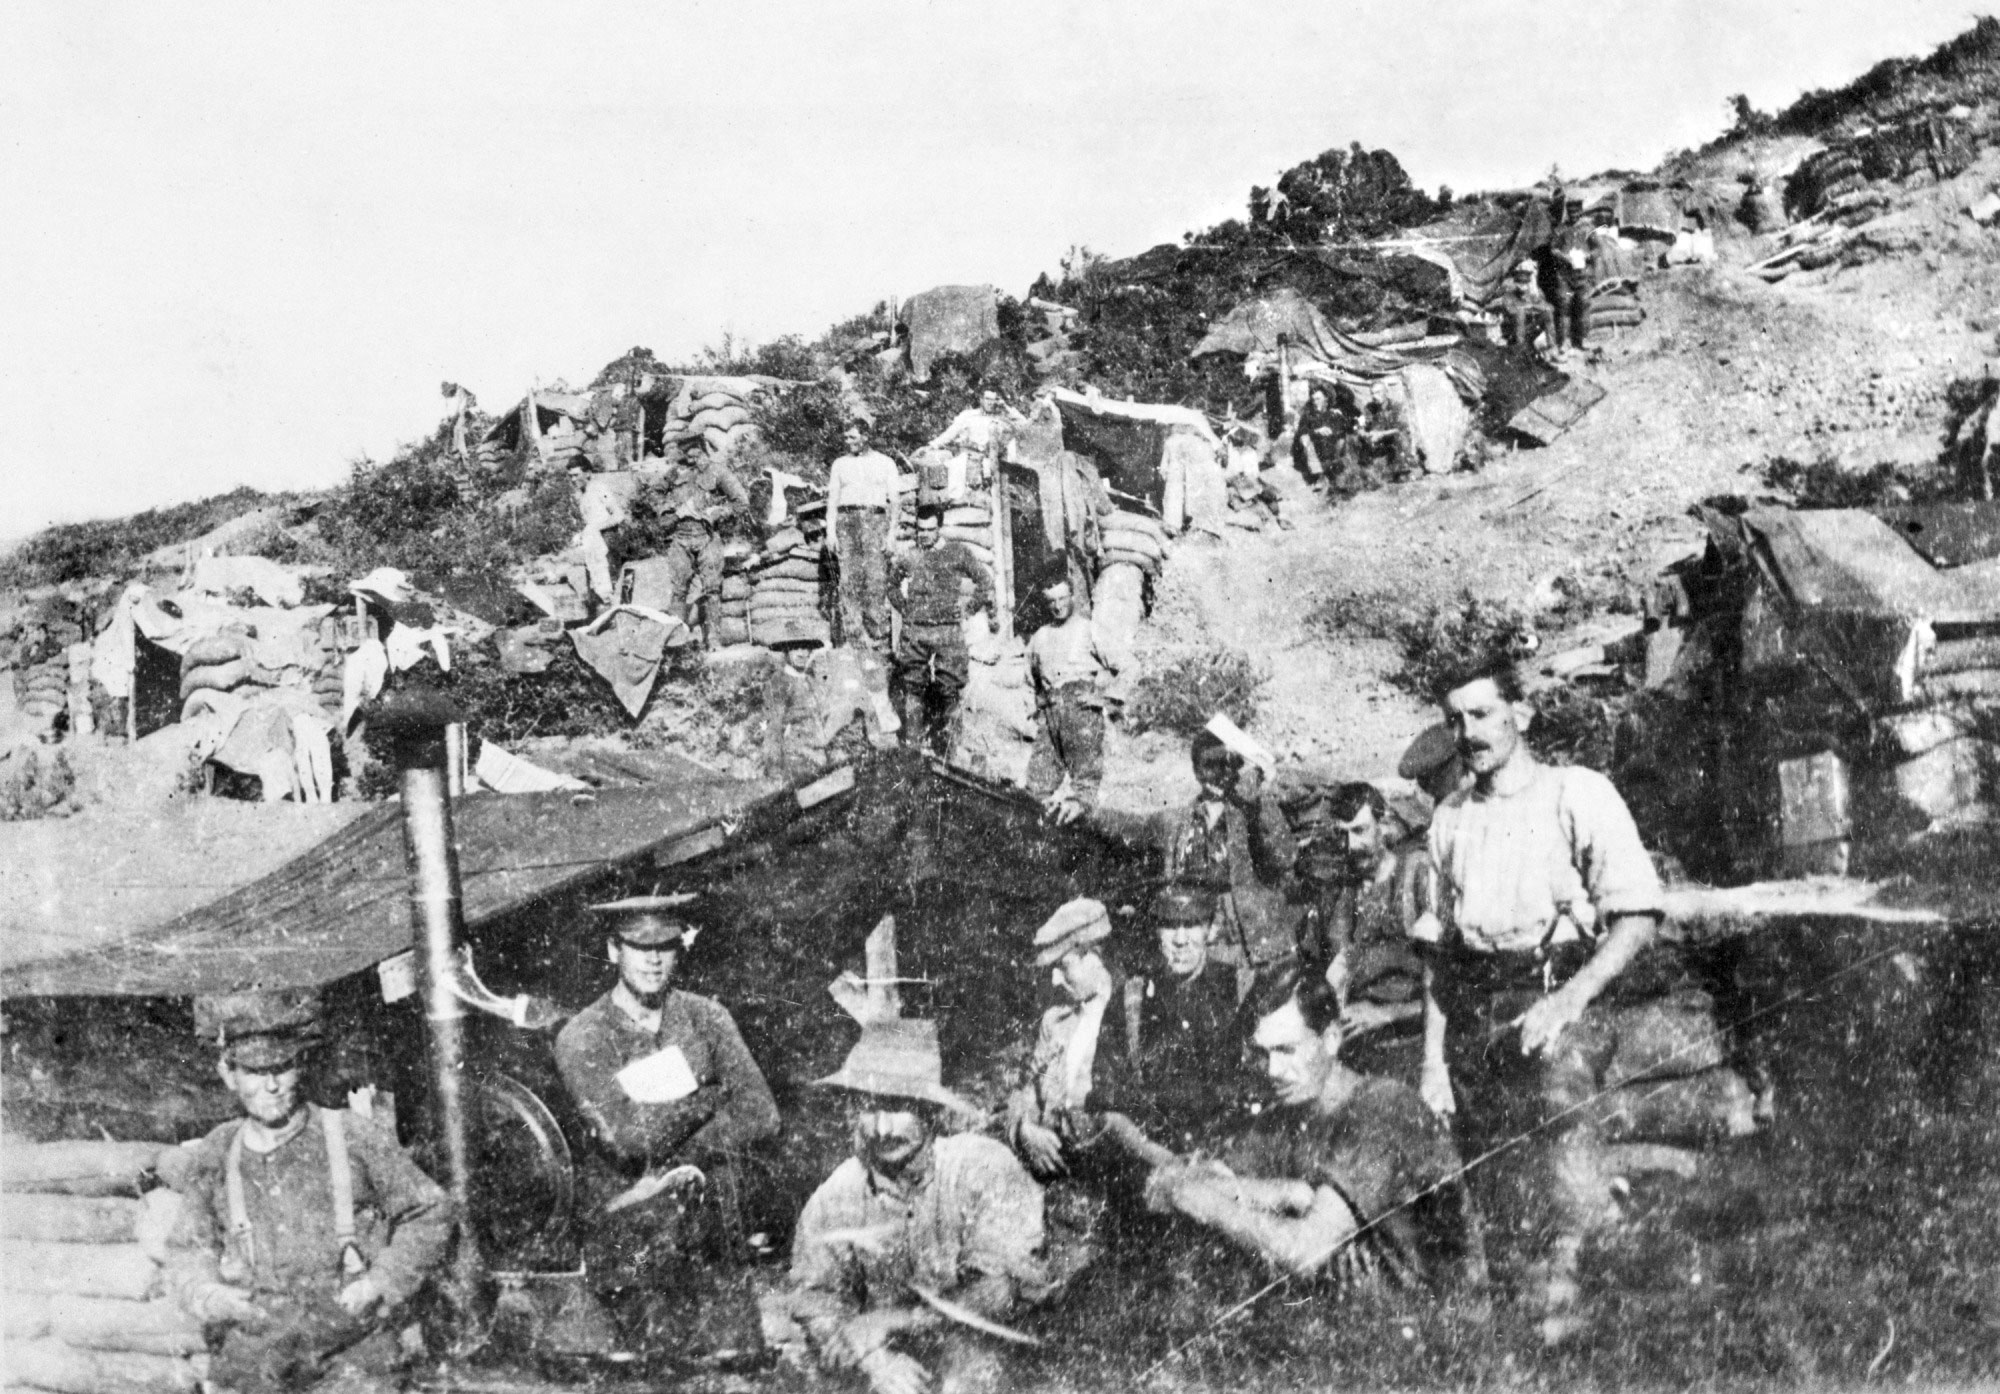 <p>Soldiers and their dugouts, Gallipoli, 1915</p>
